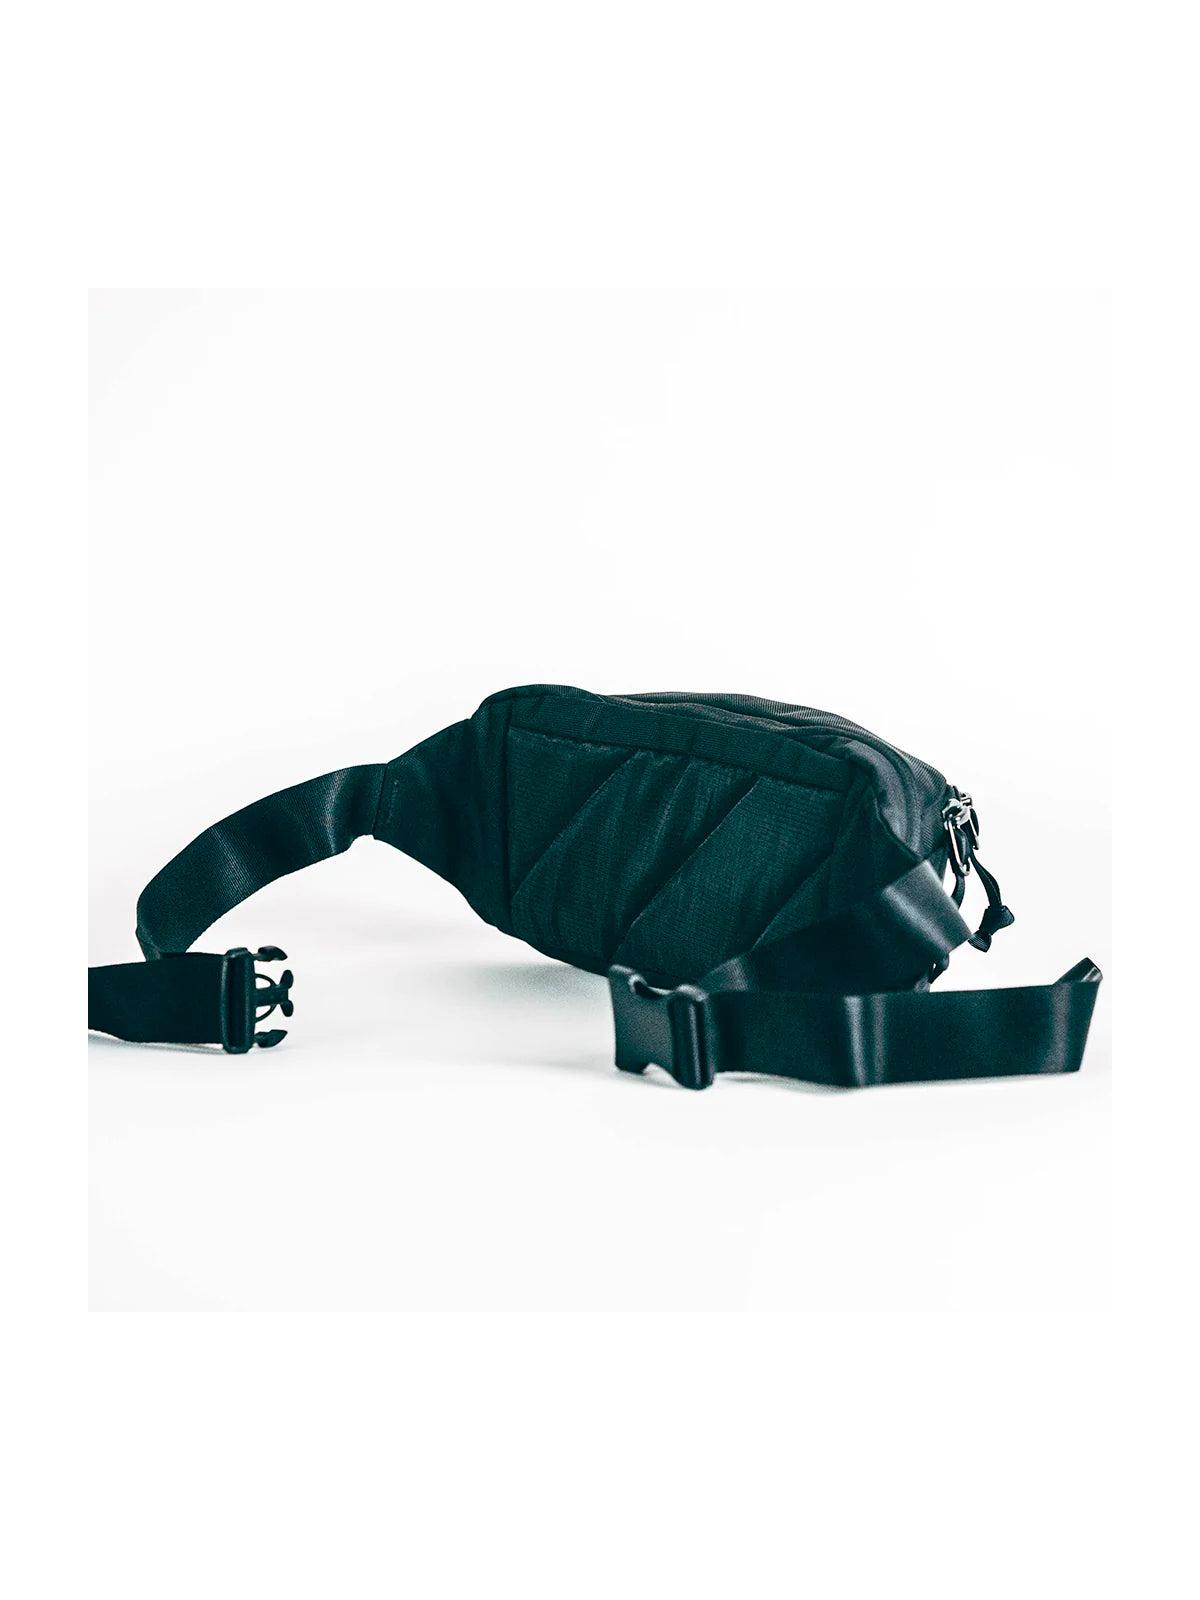 Evergoods Civic Access Sling 2L